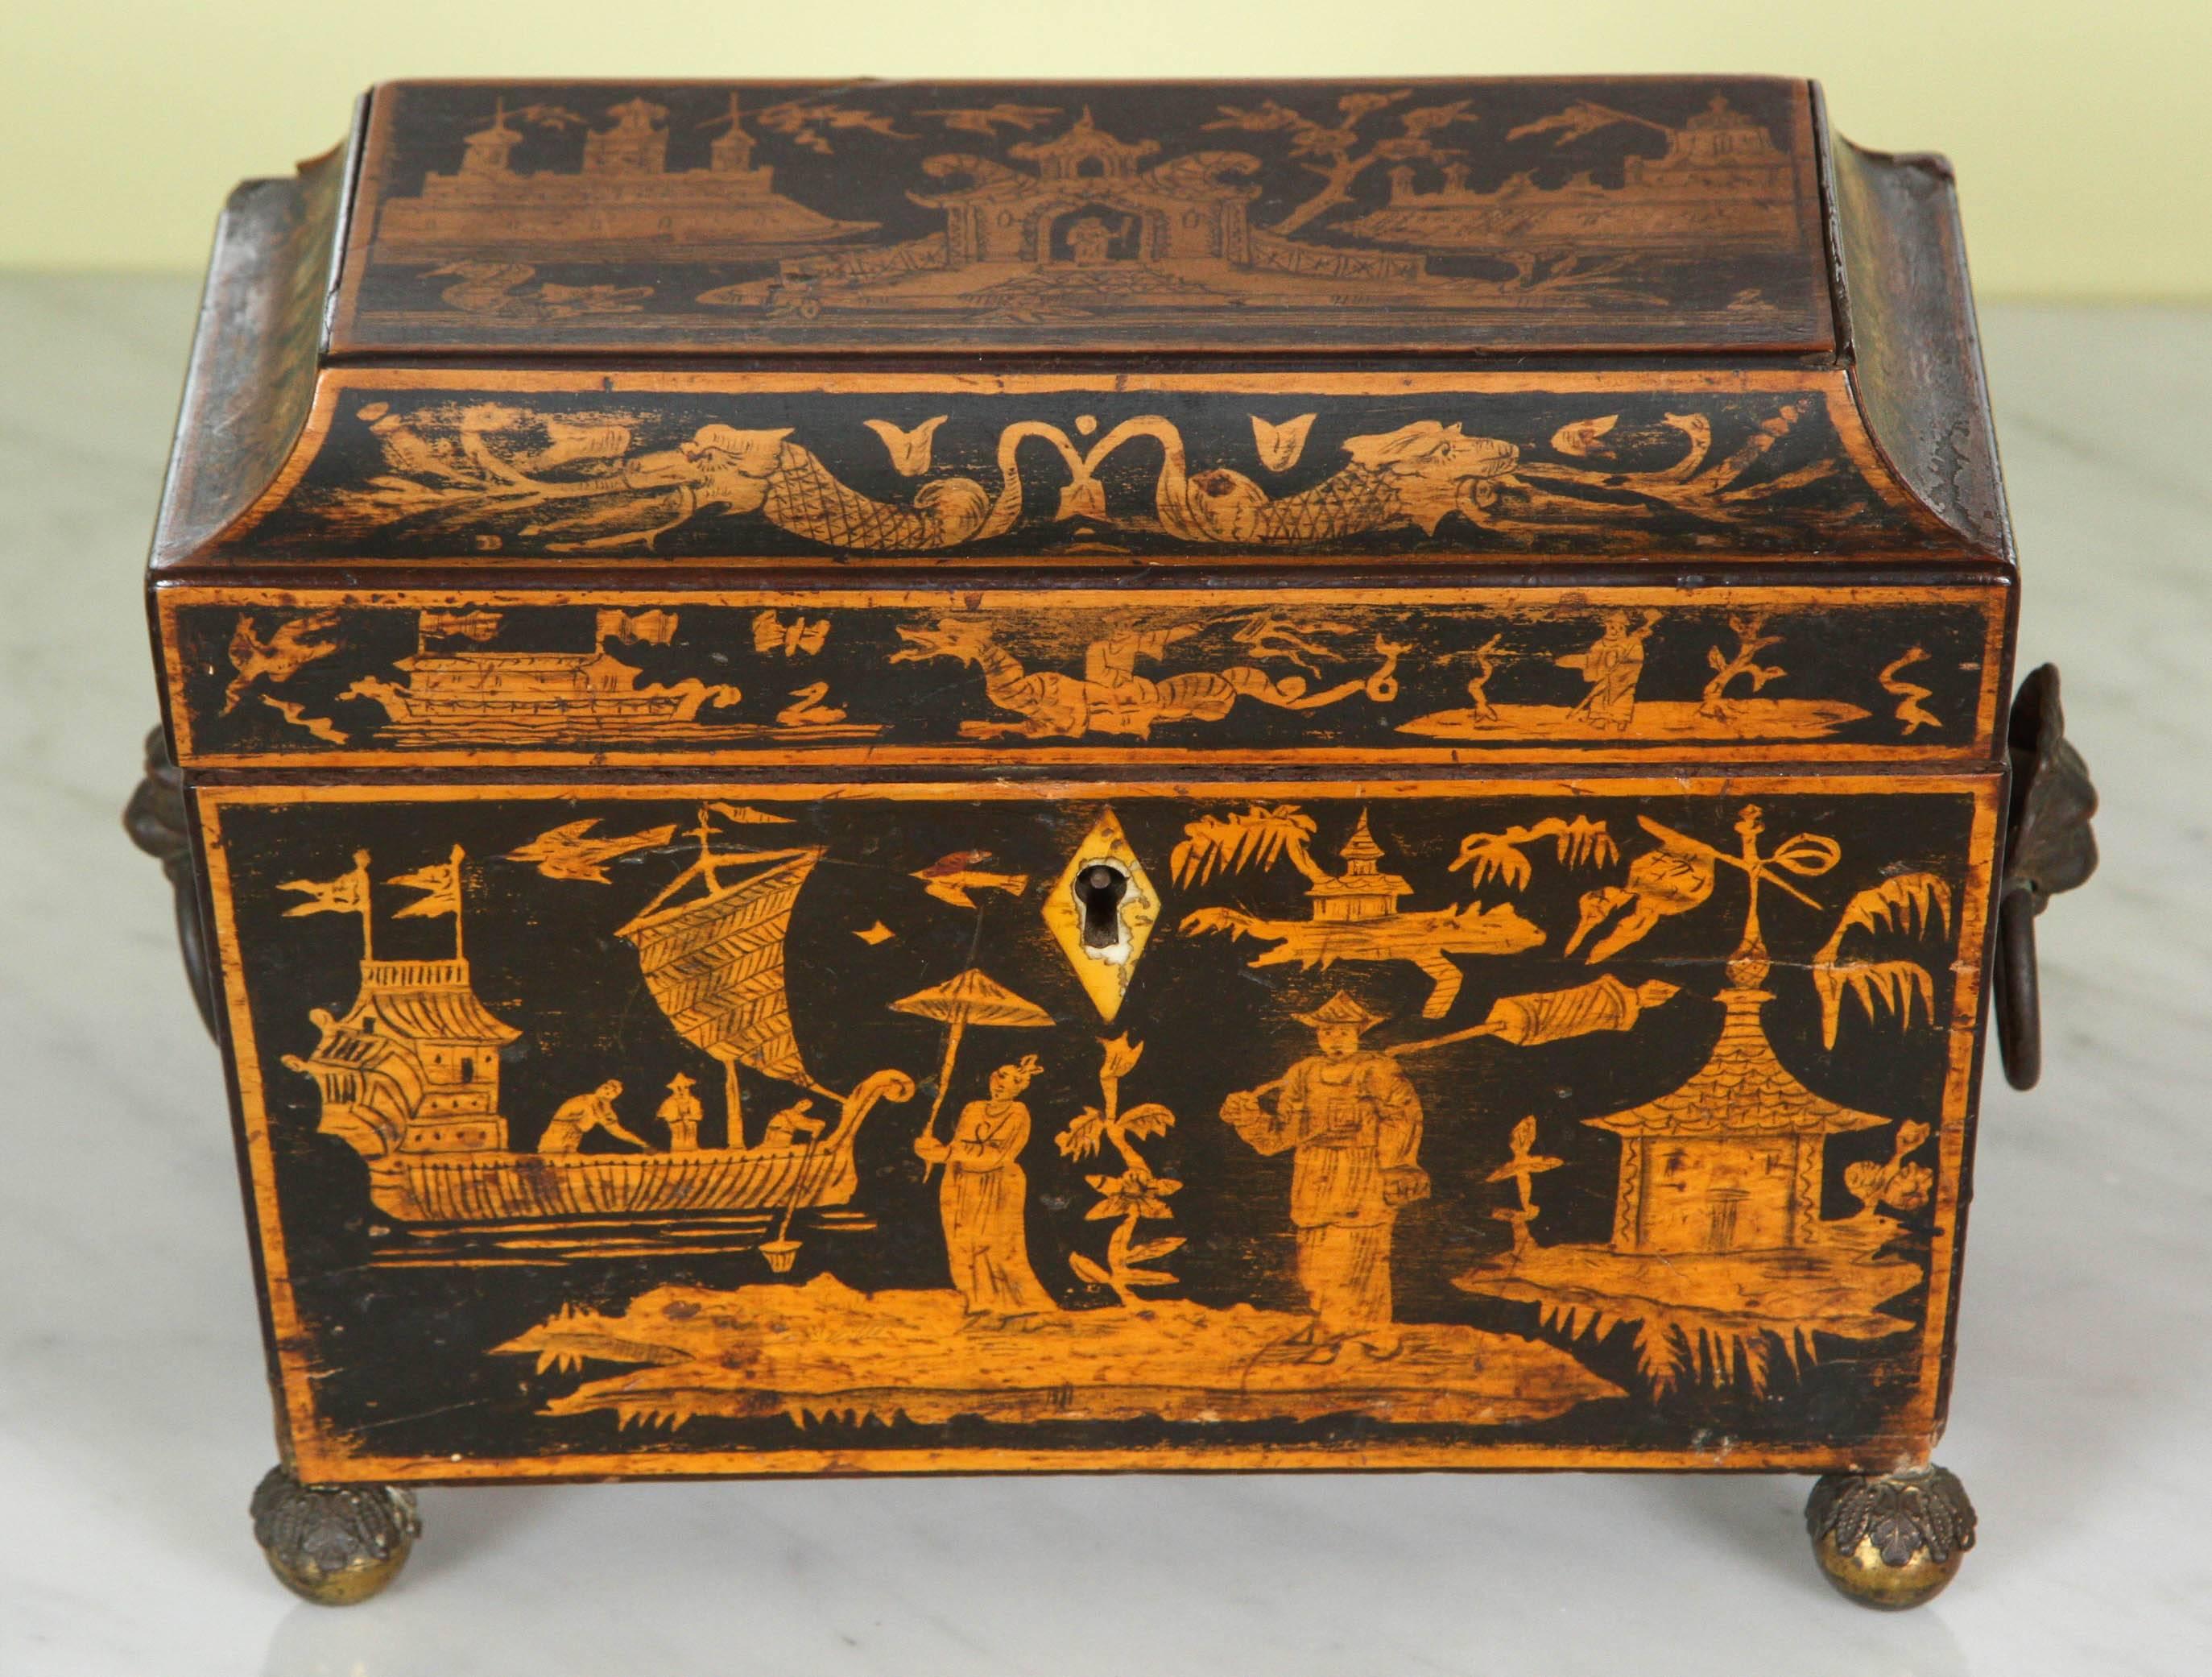 This beautiful tea caddy top depicts a naive Chinese scene with a few figures, three buildings and Naturalistic foliage with a concealed interior containing penwork decorated lids. The tea caddy is decorated on all four sides and stands on brass